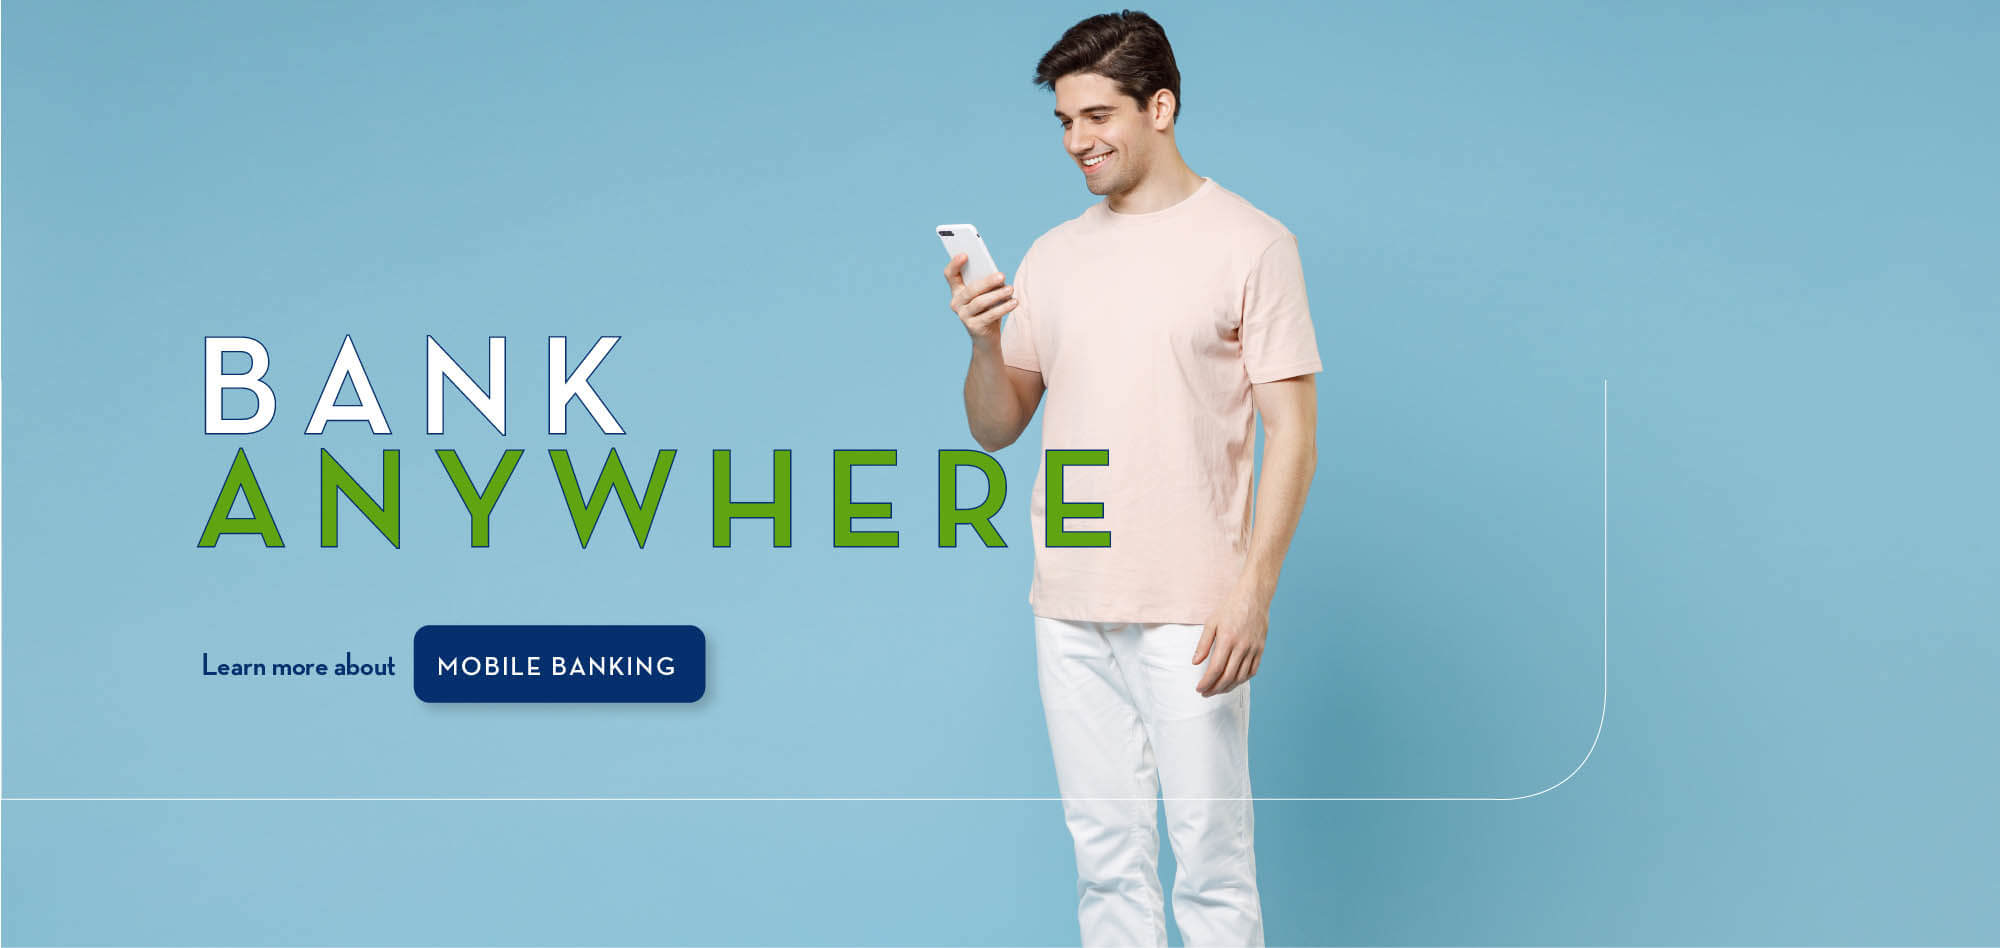 Bank Anywhere! Click to learn more about mobile banking